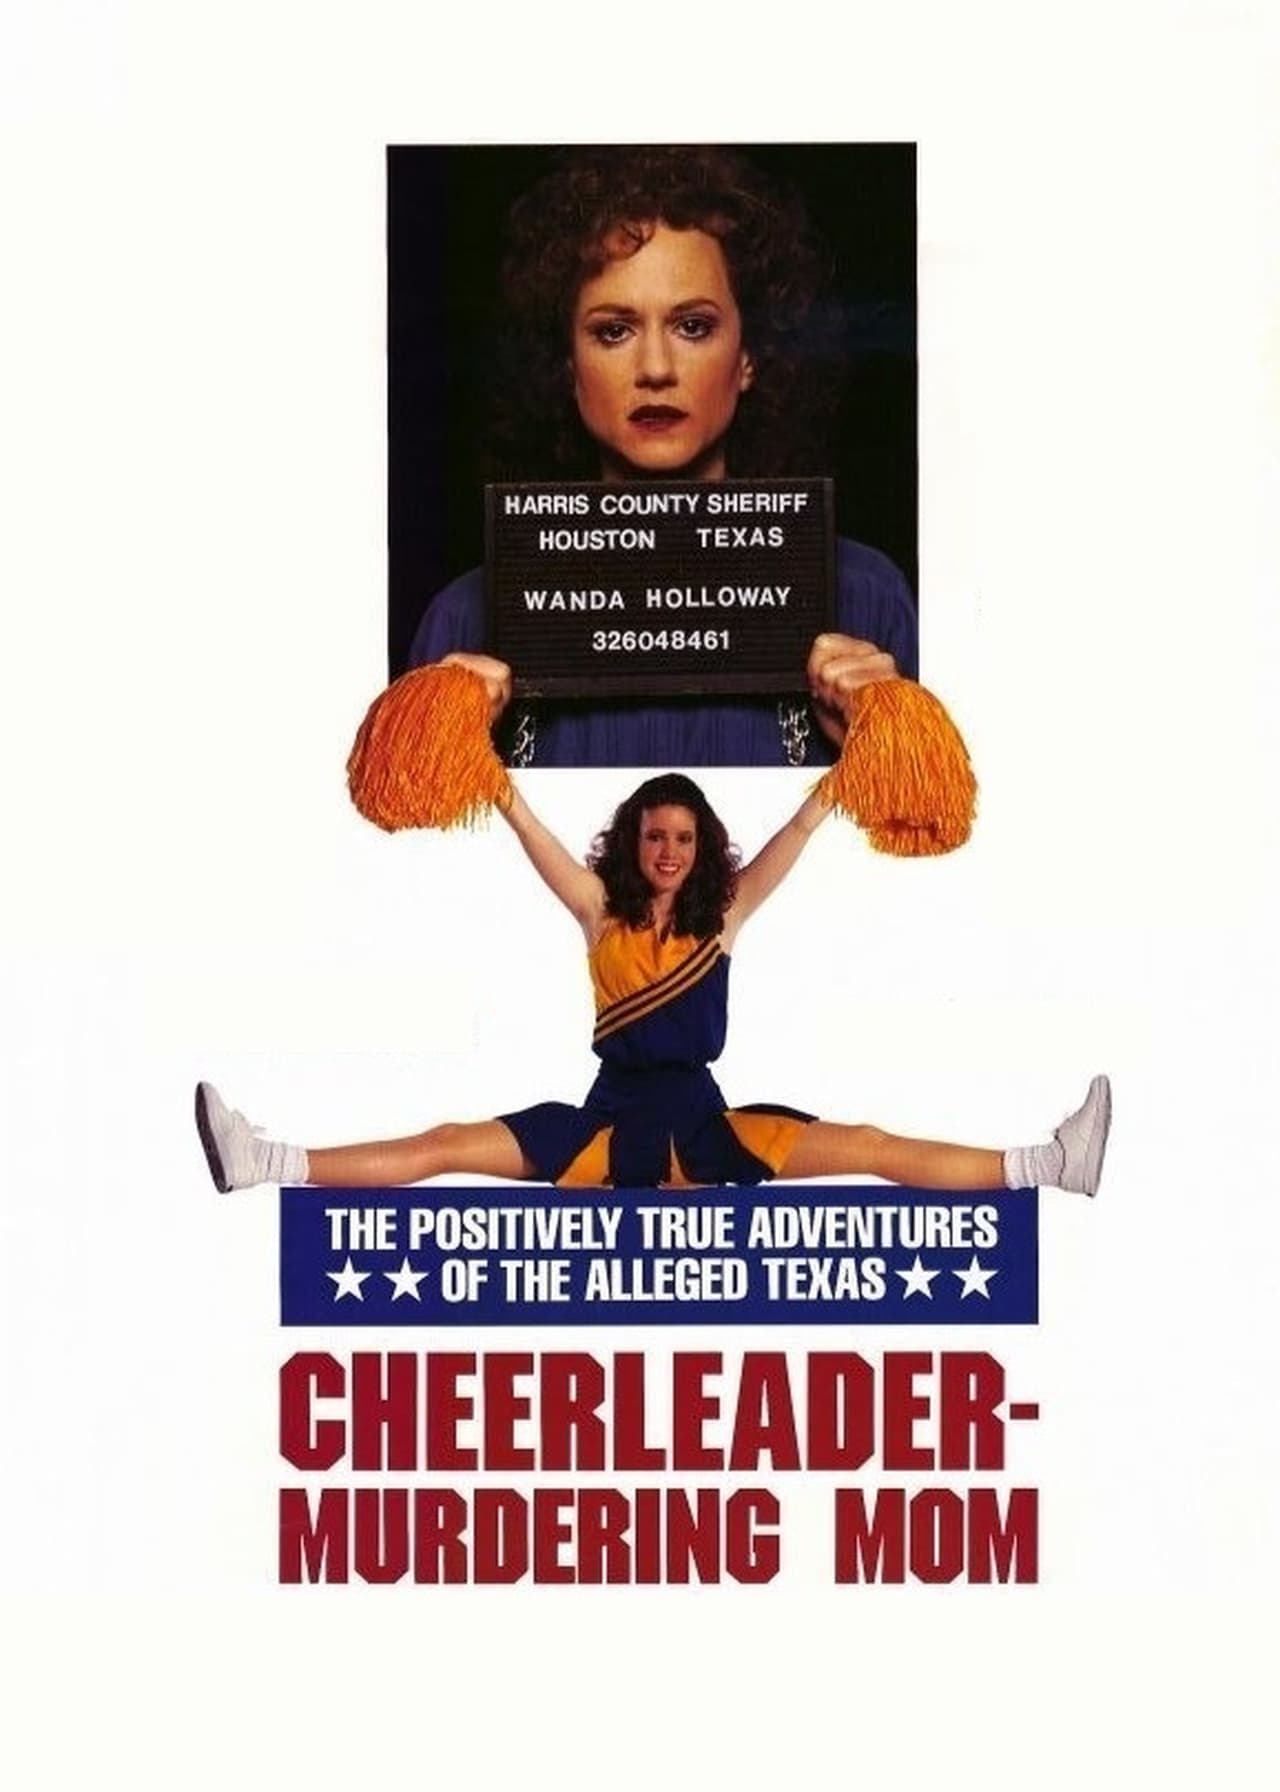 The Positively True Adventures of the Alleged Texas Cheerleader-Murdering Mom (1993)